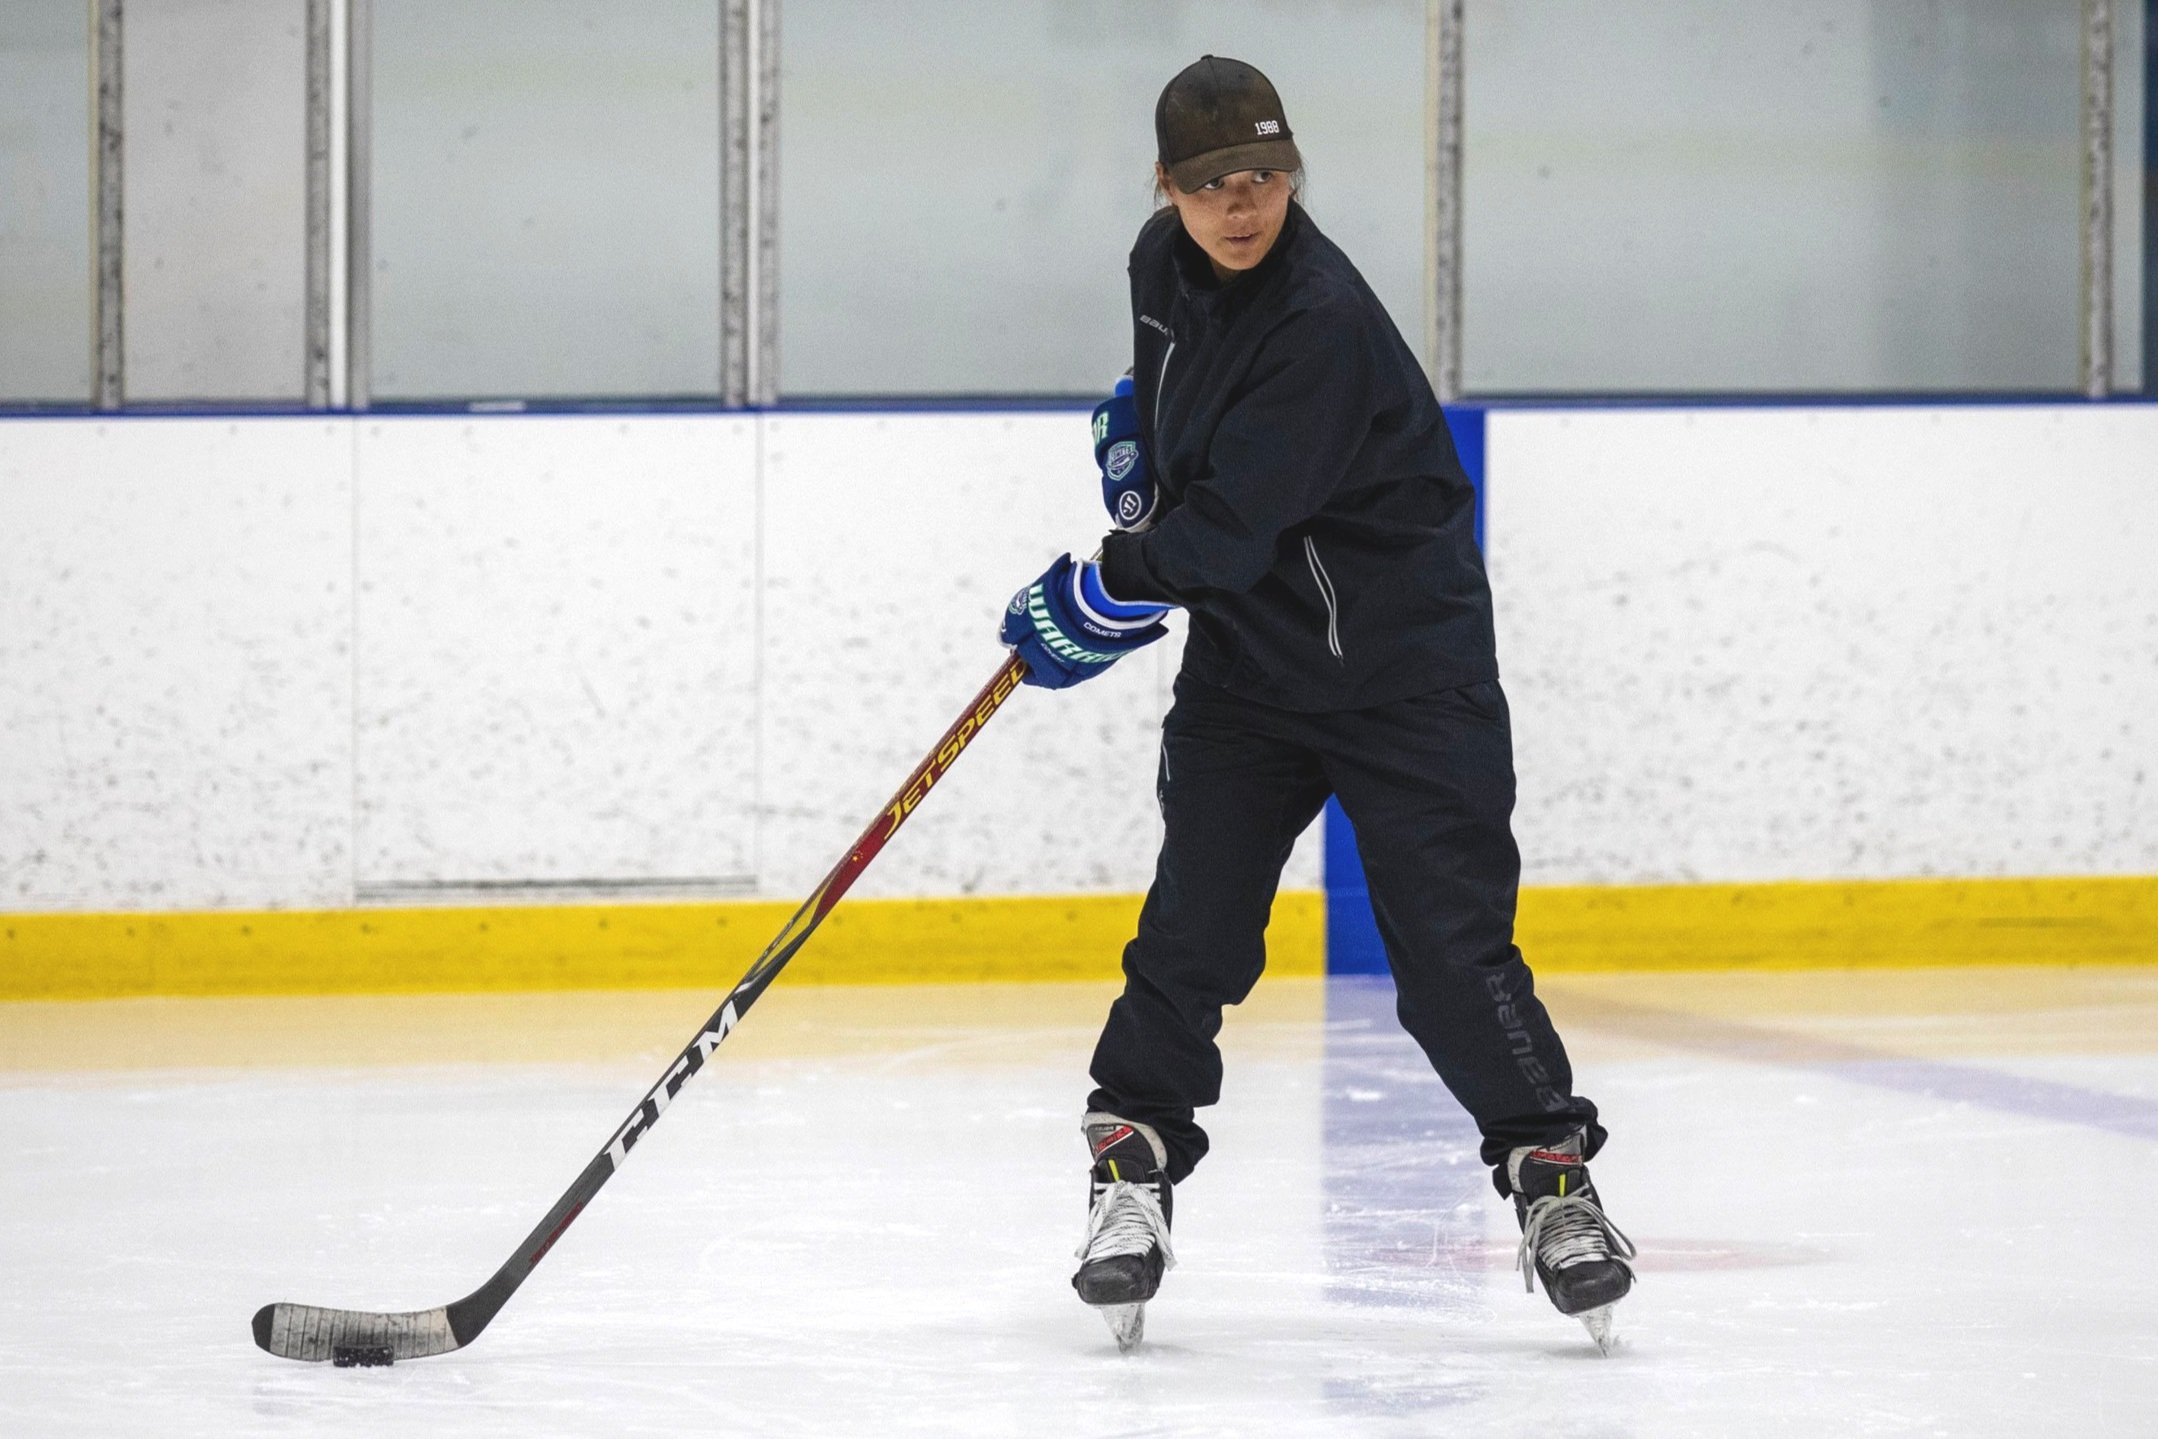 Las Vegas valley girls introduced to hockey through Empowered